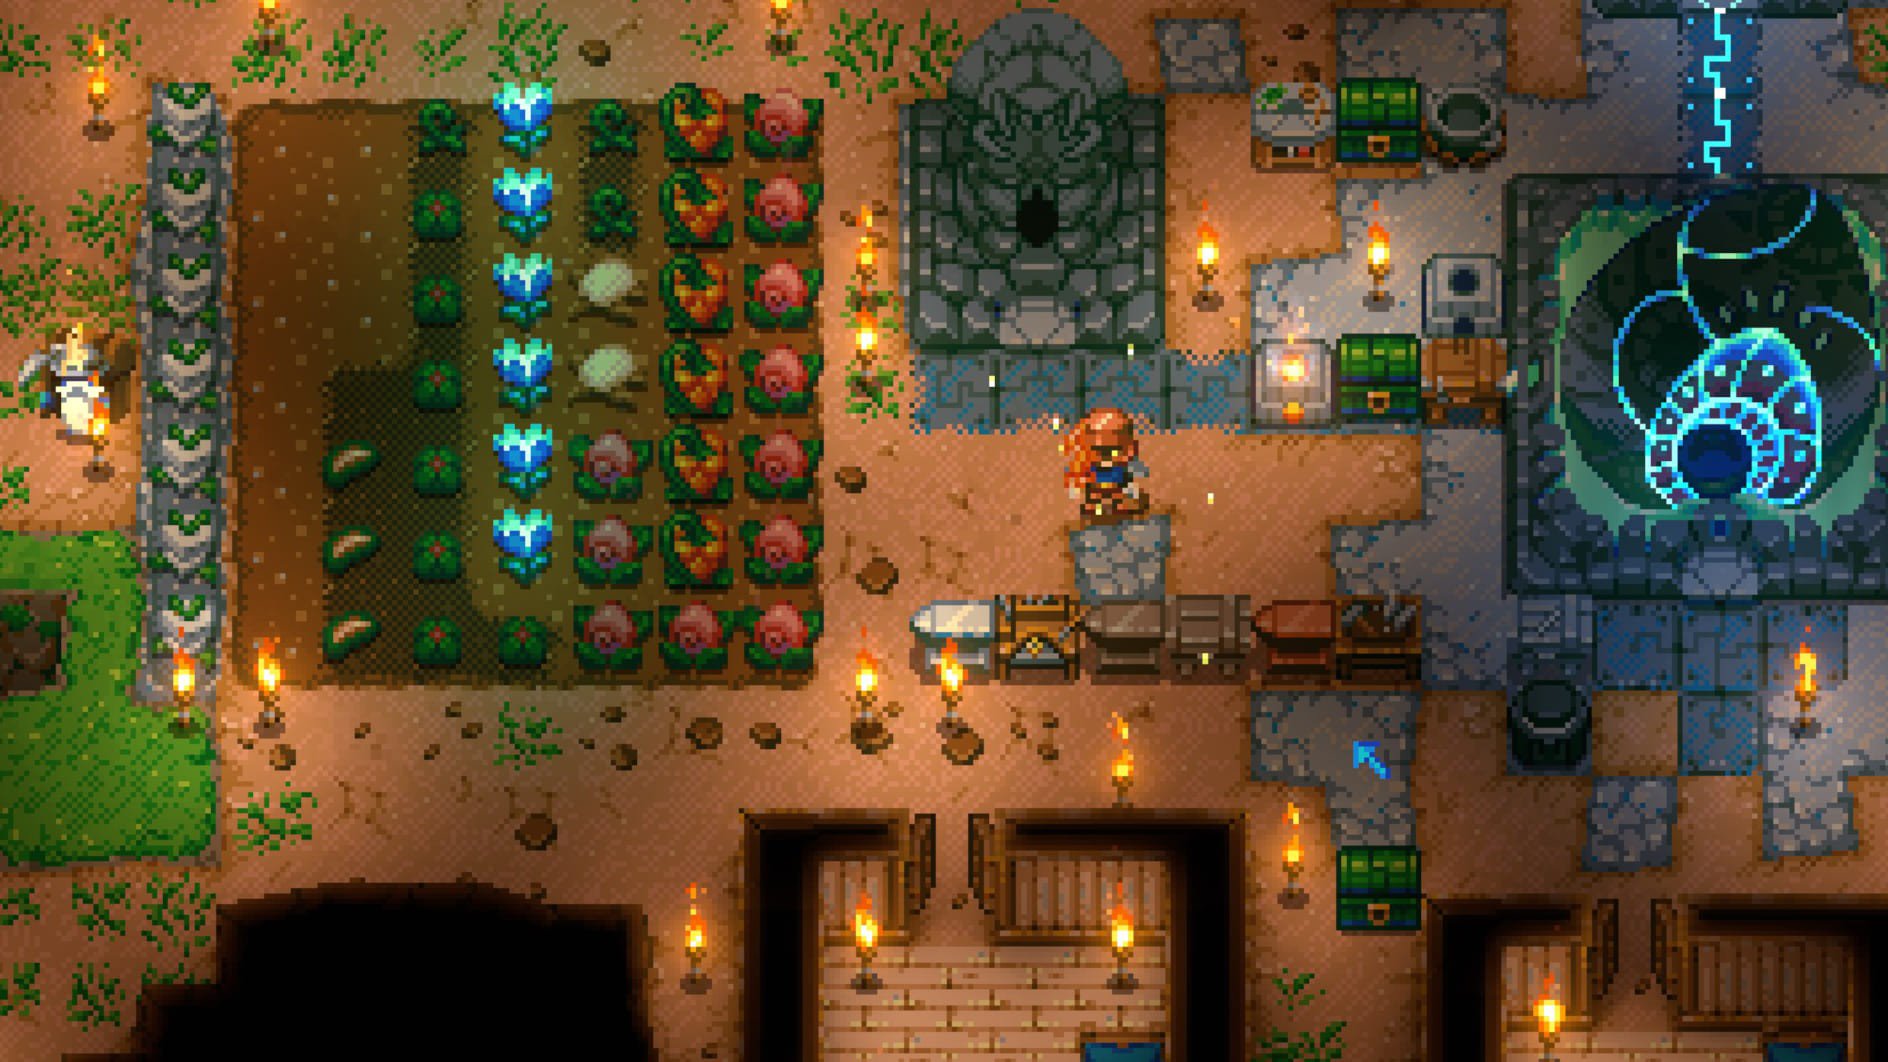 Player farming inside of their base, with colourful plants.